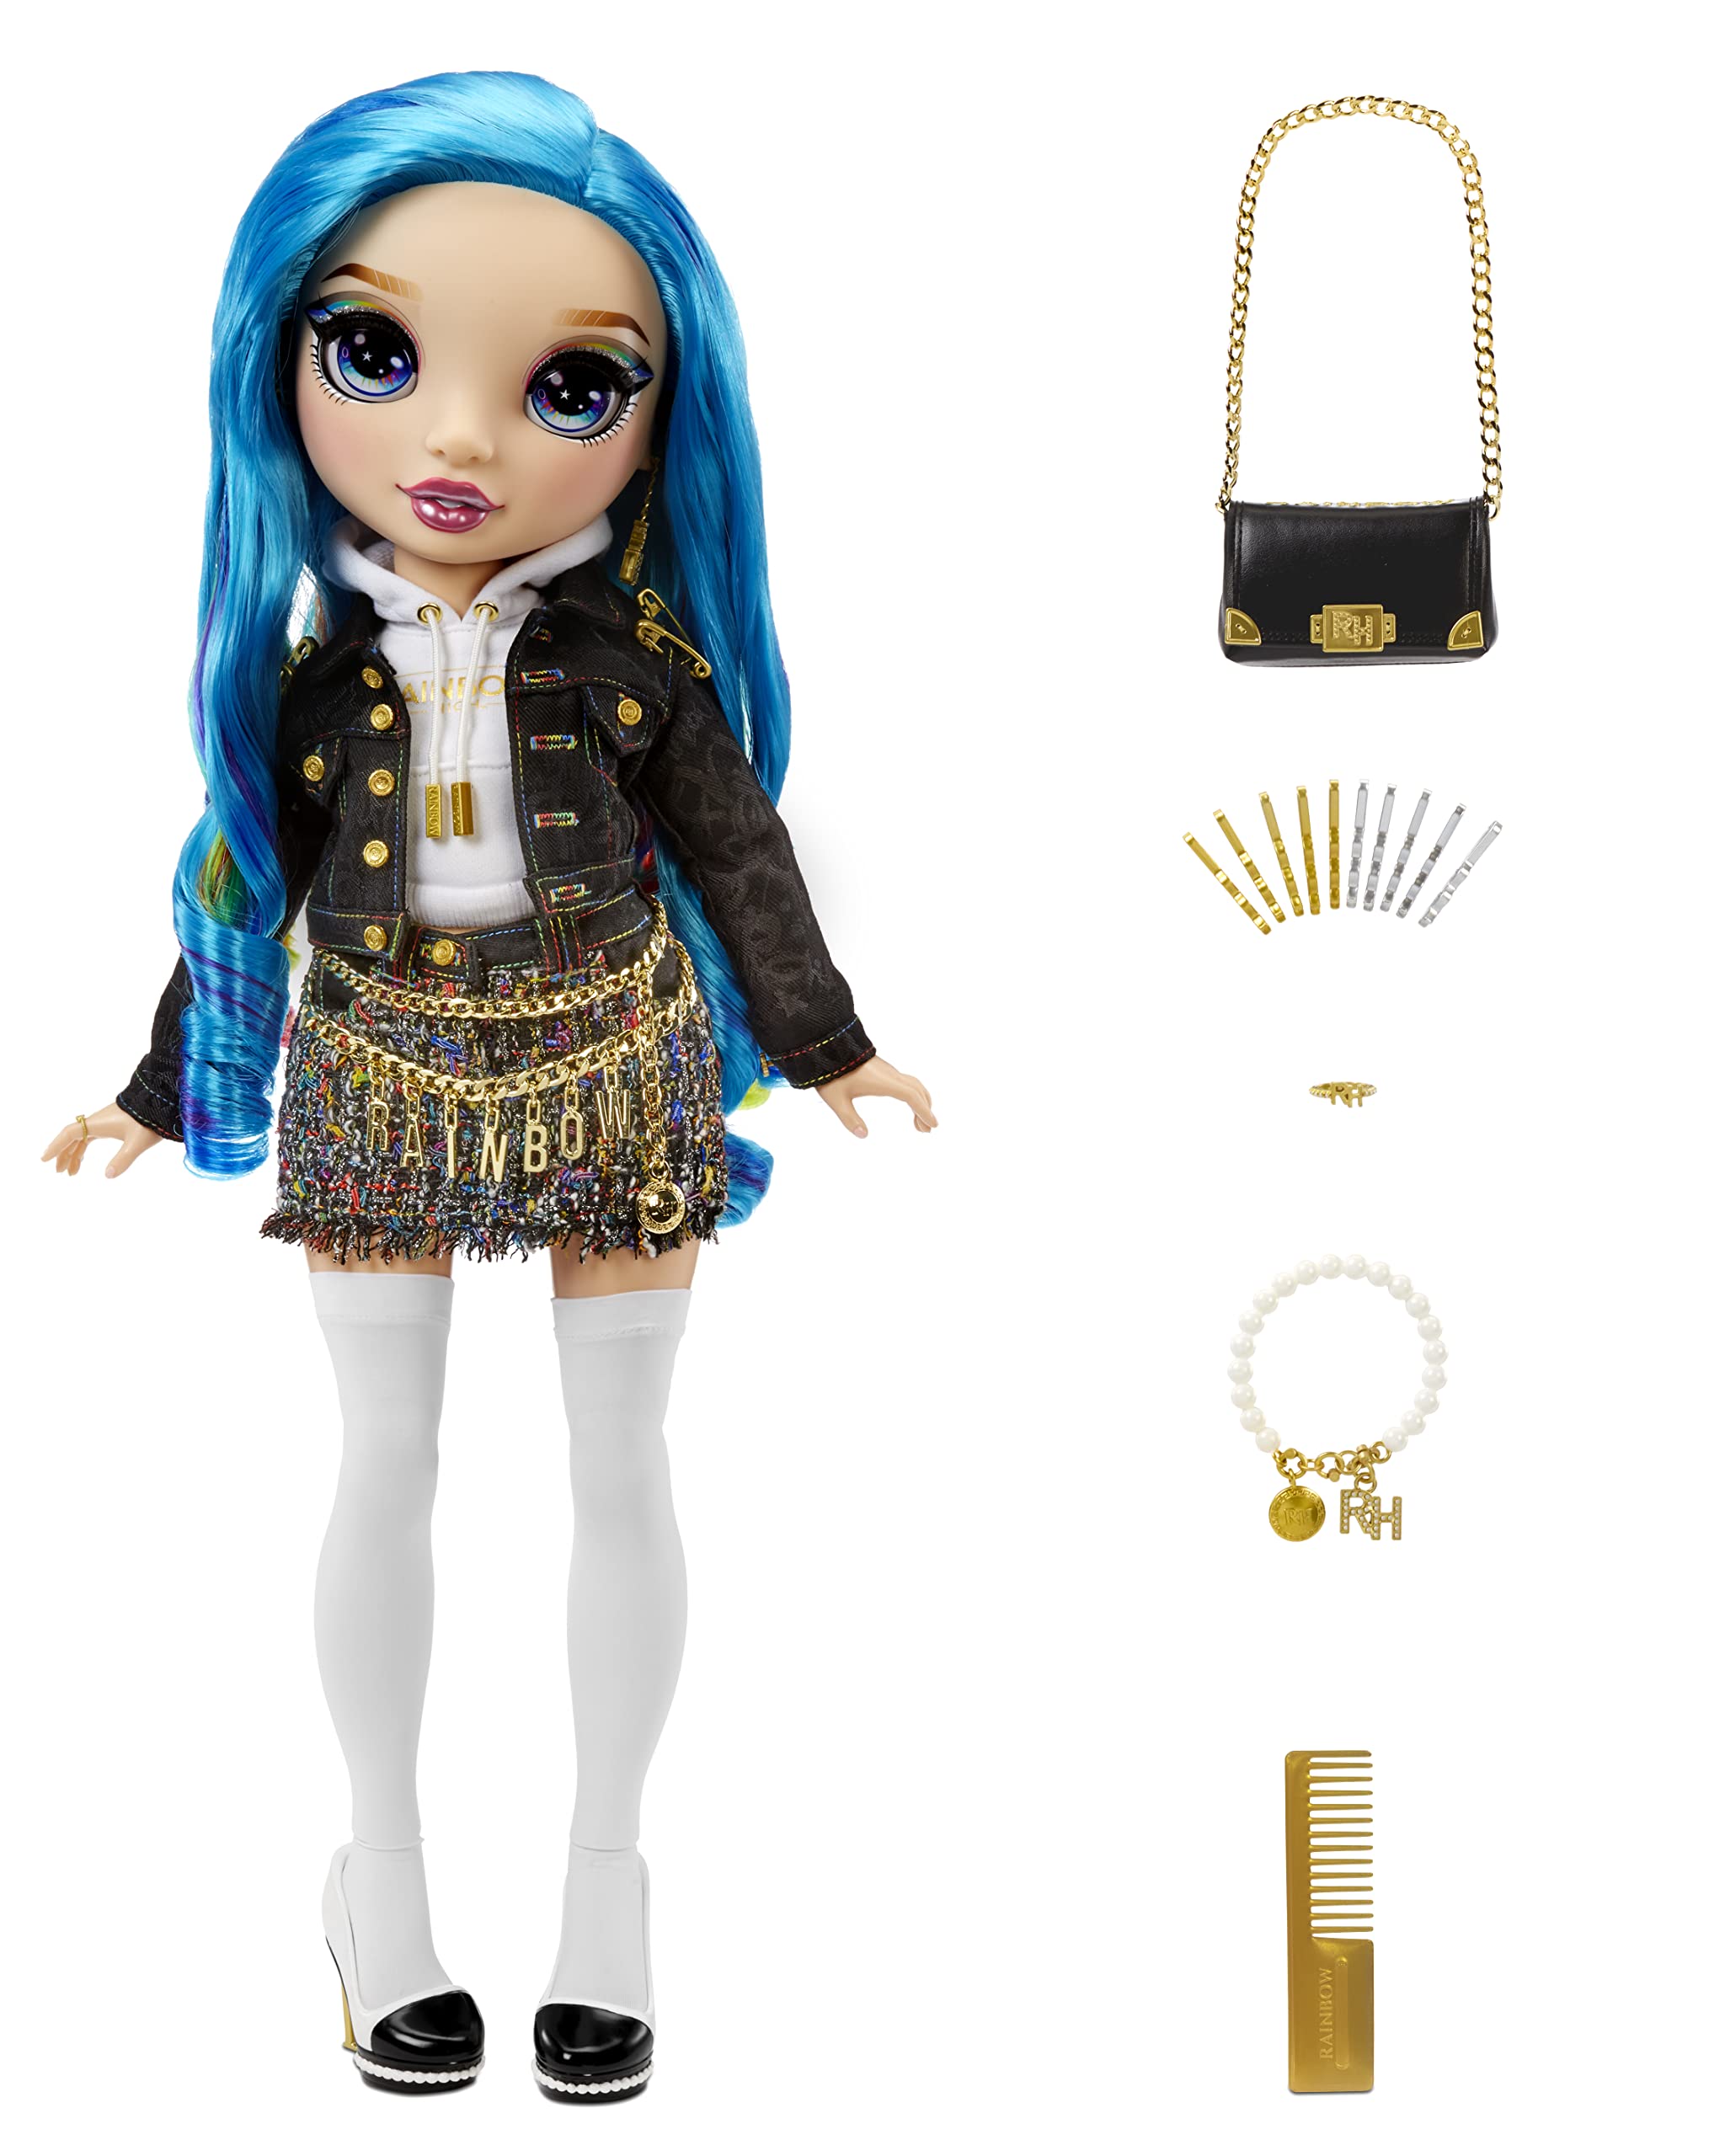 Rainbow High My Runway Friend, Amaya Raine New 24-inch Fashion Doll & 25+ Accessories, Special Edition Rainbow Hair Poseable, Gift for Kids and Collectors, Toys for Kids Ages 6 7 8+ to 12 Years Old, Multicolor